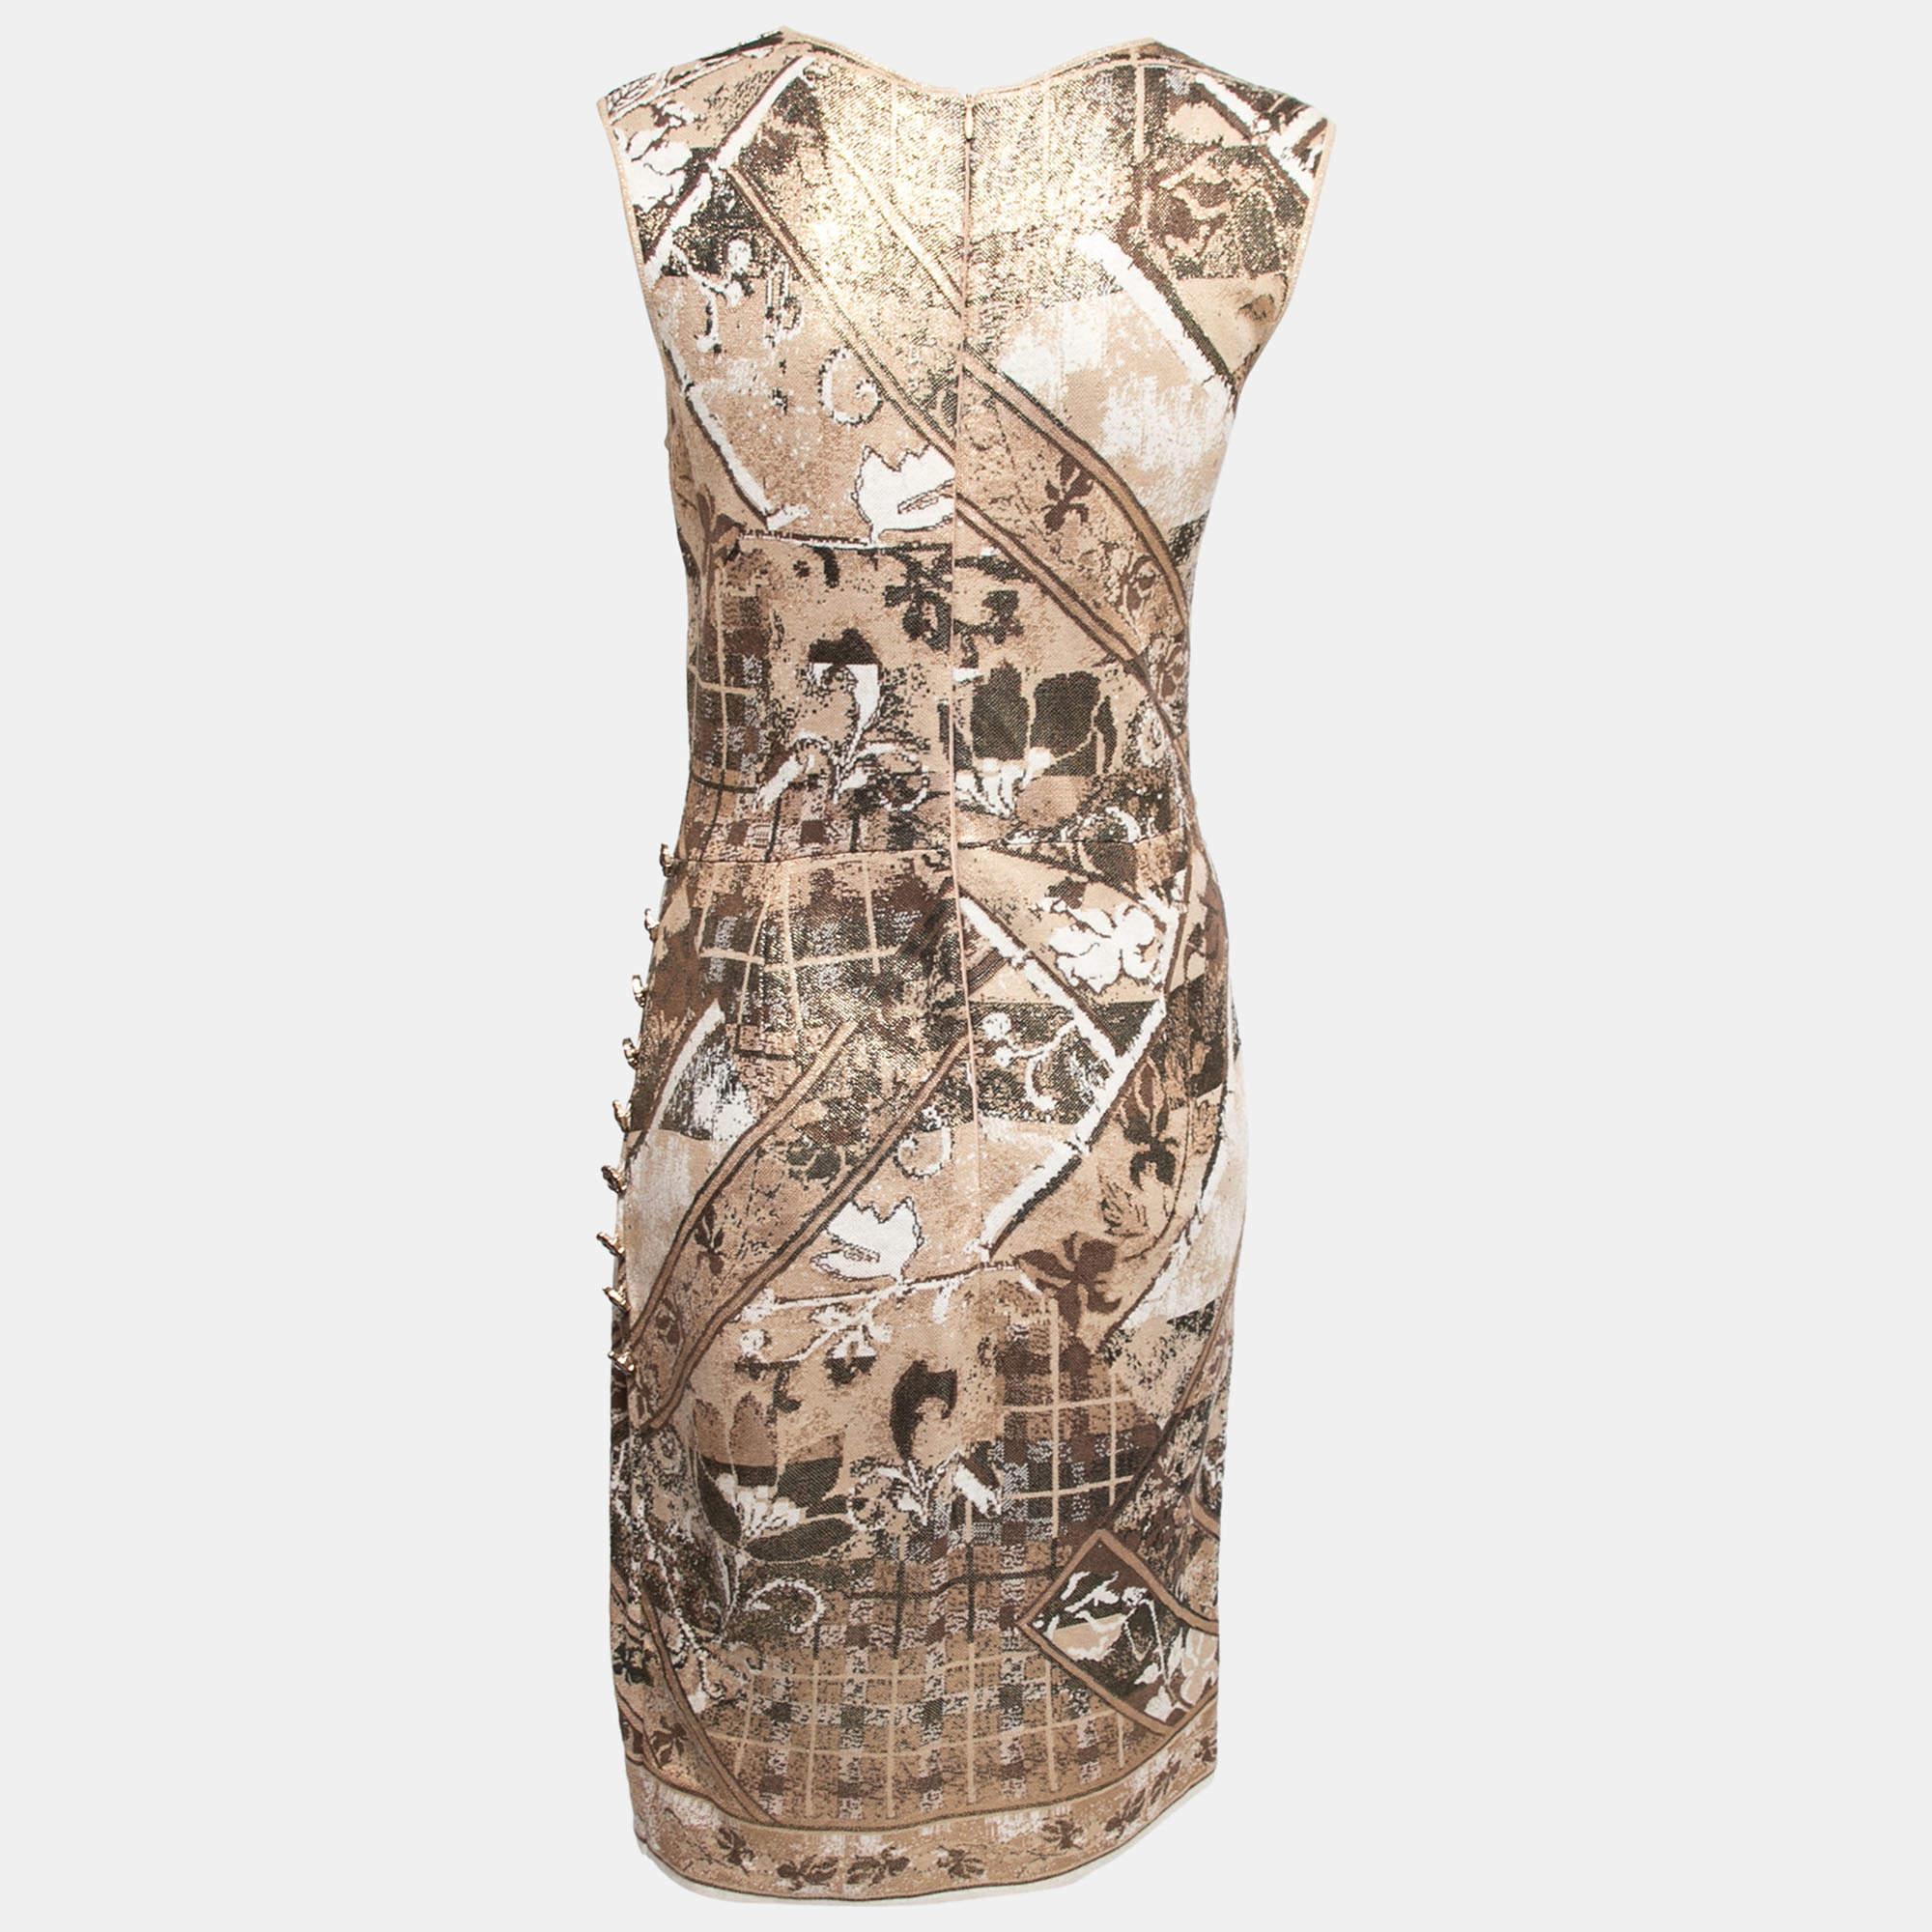 The House of Chanel brings you this stunning dress which is a perfect fit for your luxury wardrobe. It is fashioned in beige-gold jacquard knit fabric and is embellished with buttoned accents. It exhibits a sleeveless style and a zipper closure.